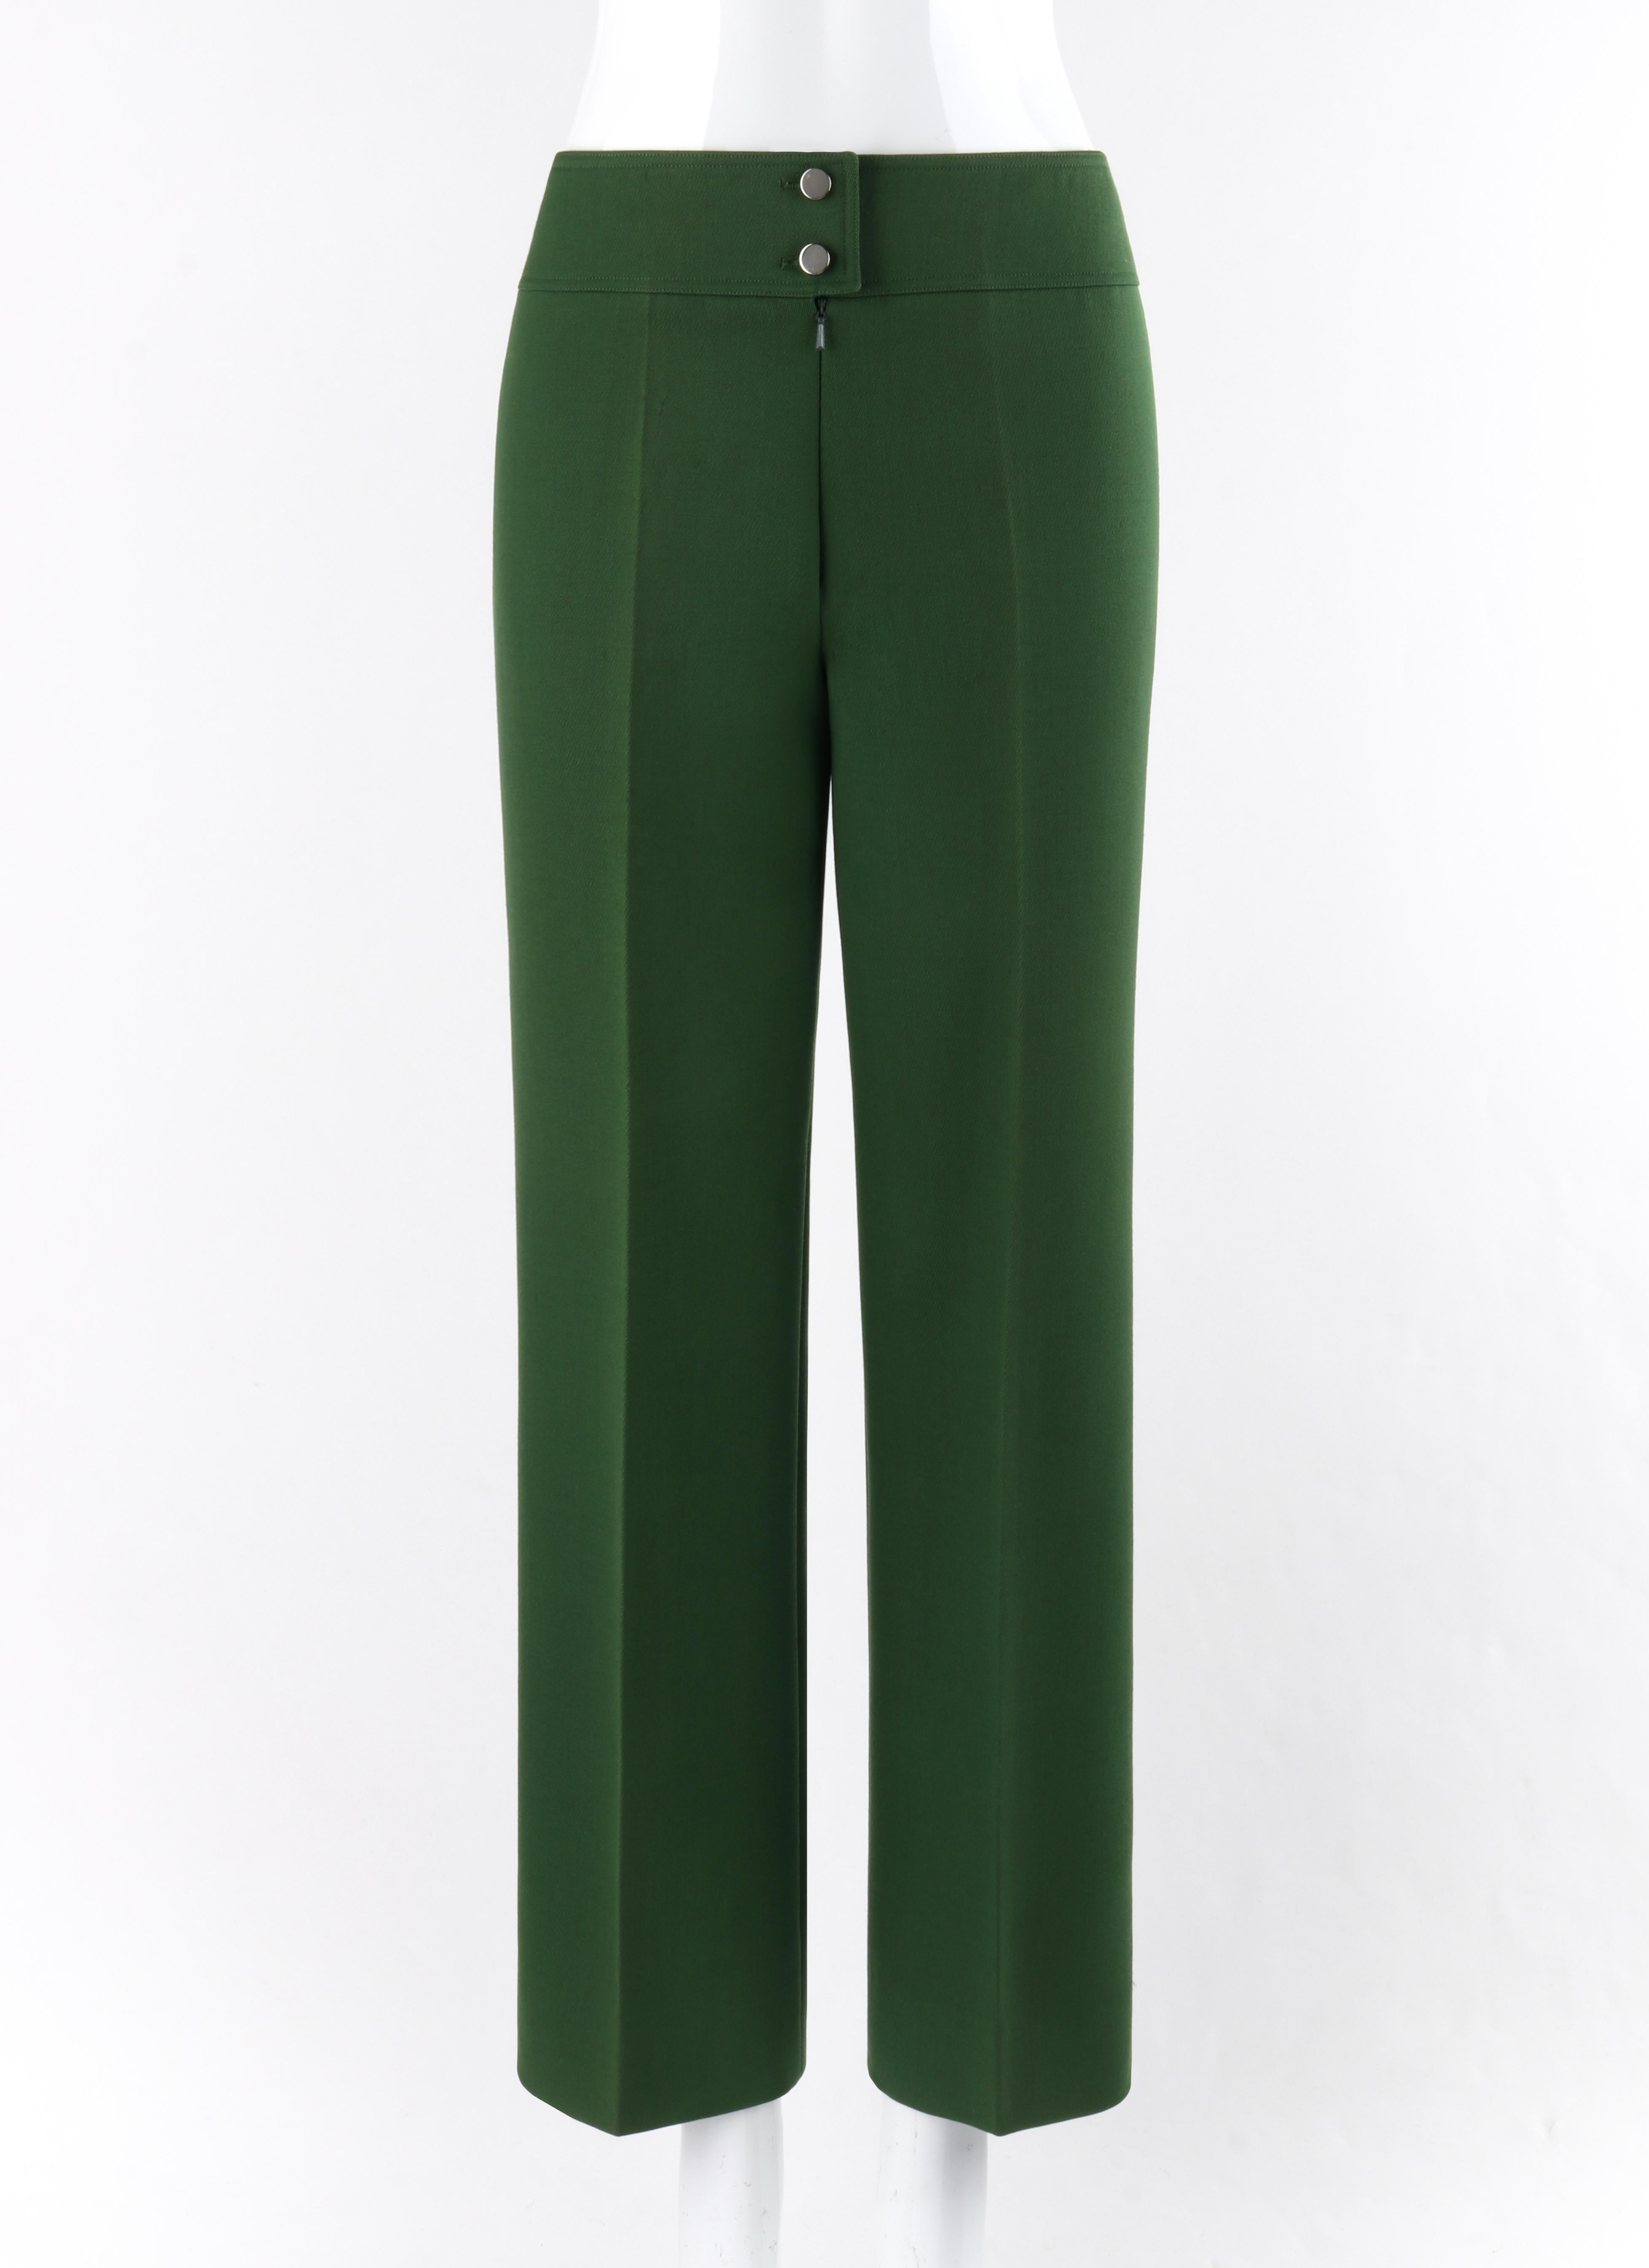 COURREGES c.1970’s Green Fitted Waistband Straight / Wide Leg Trouser Pants

Circa: 1970’s
Label(s): Courreges Paris
Designer: Andre Courreges
Style: Wide leg trousers
Color(s): Green
Lined: Yes
Marked Fabric Content: “100% Wool” (shell); “100%